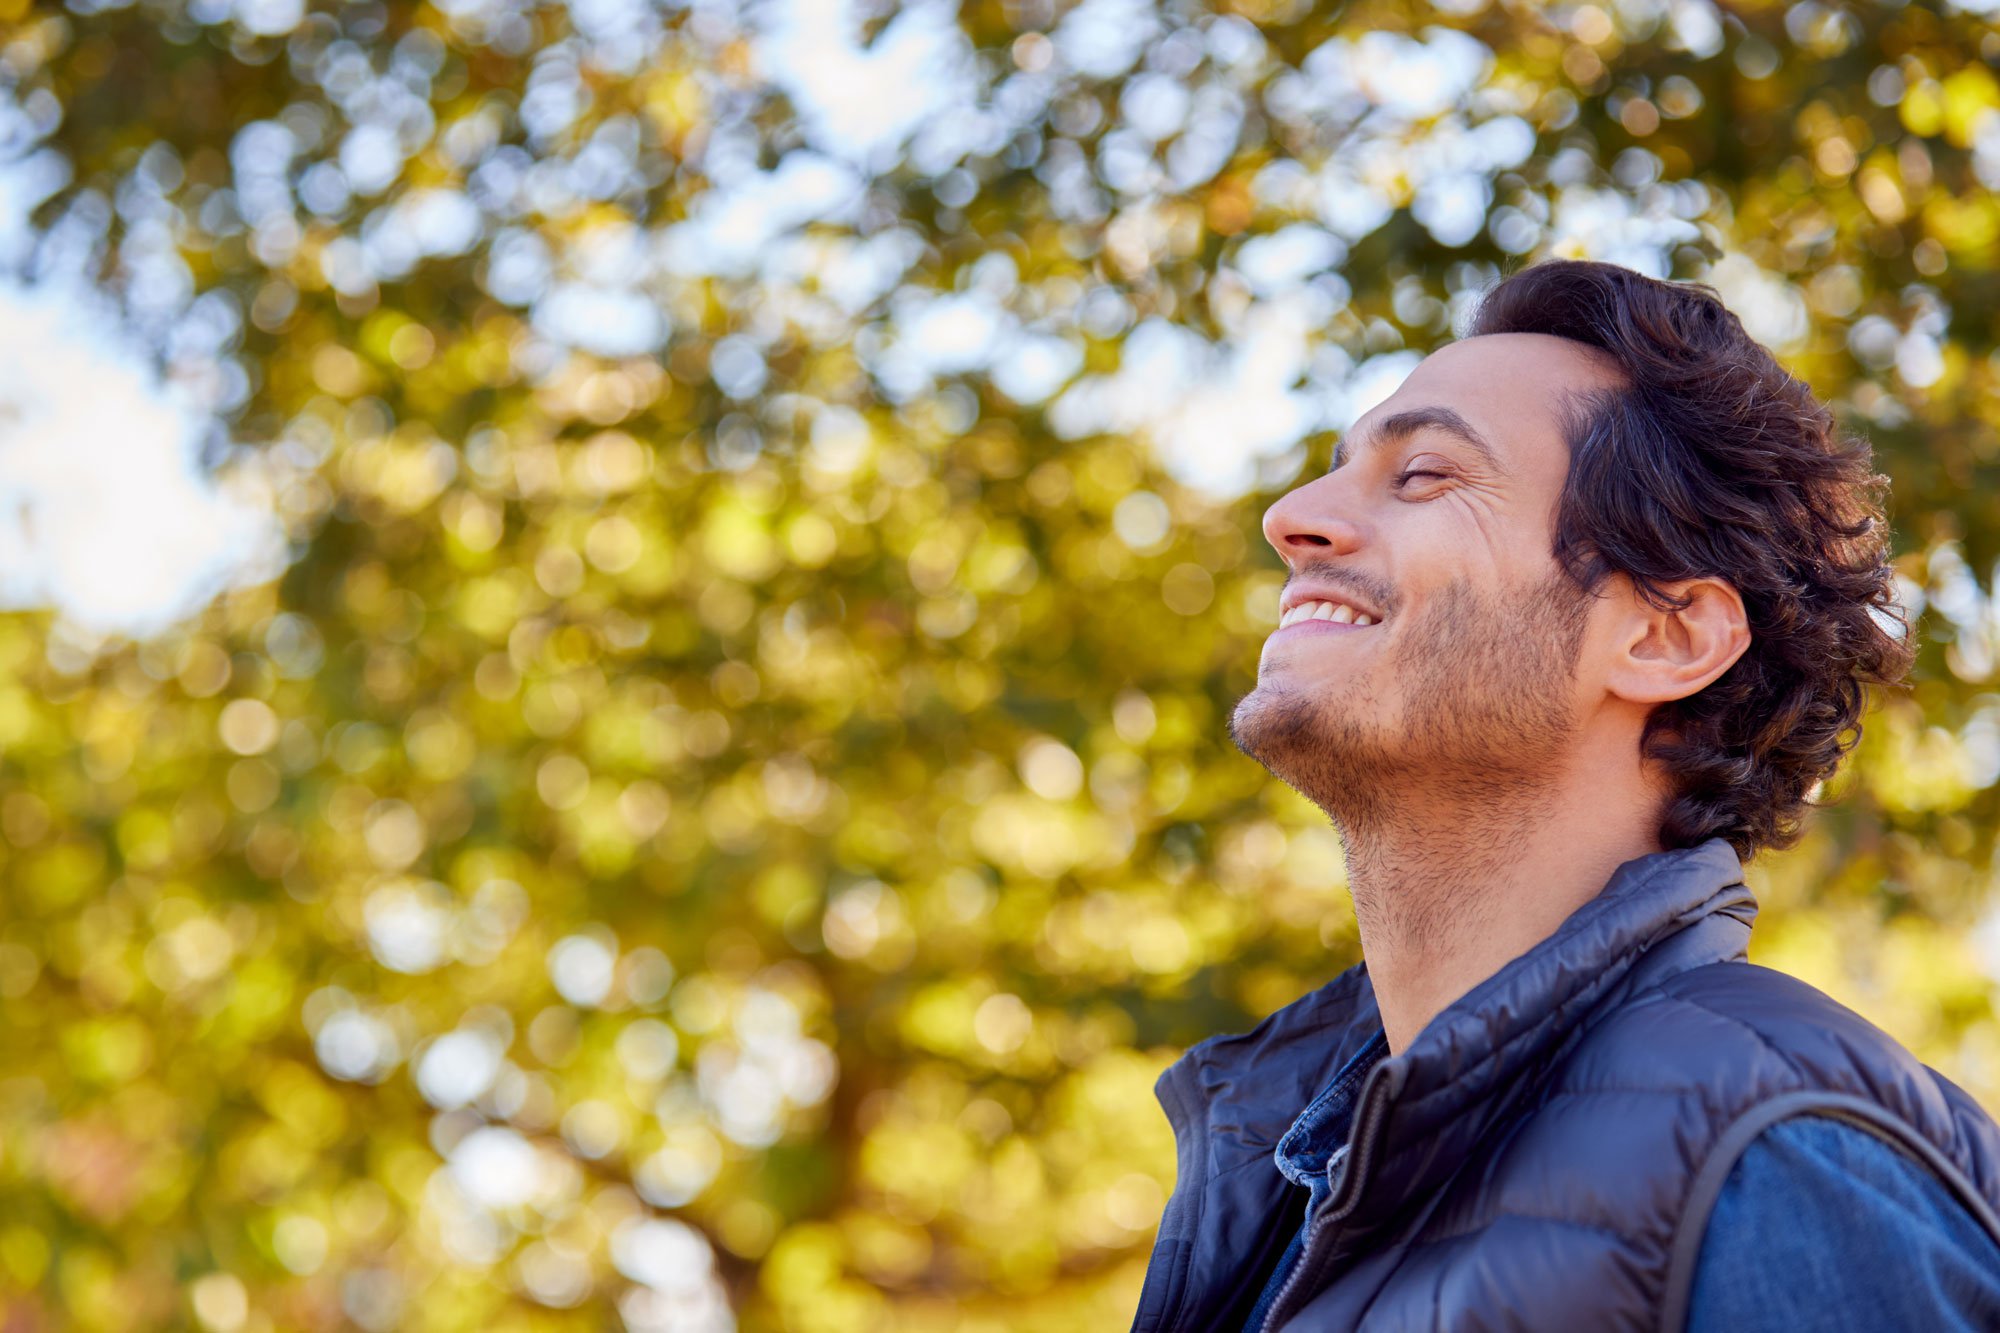 Man standing outdoors looking up and smiling